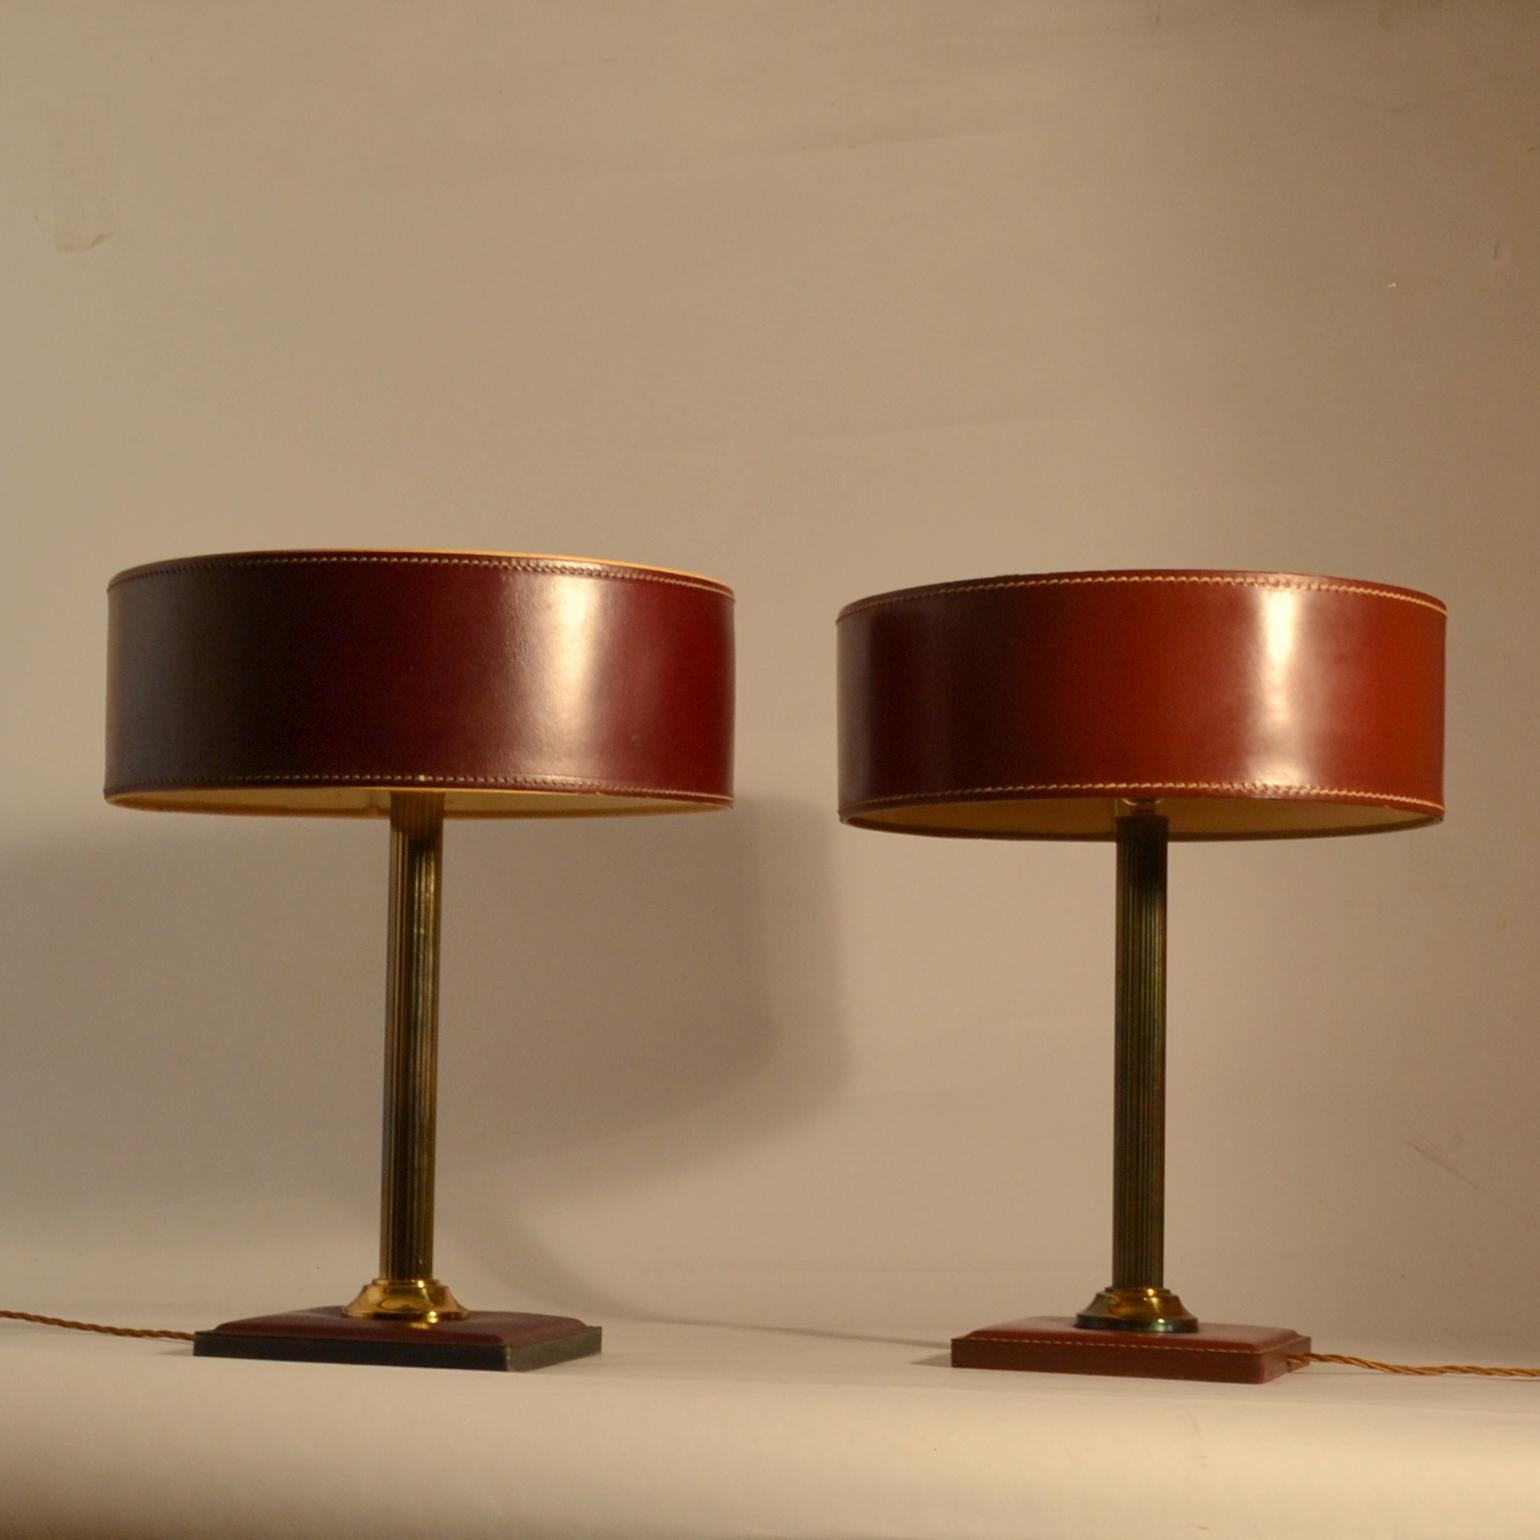 Red-brown leather table lamps with a cylinder shade and square base with detailed contrasting stitching standing on a brass stem.
Variations on this model available.